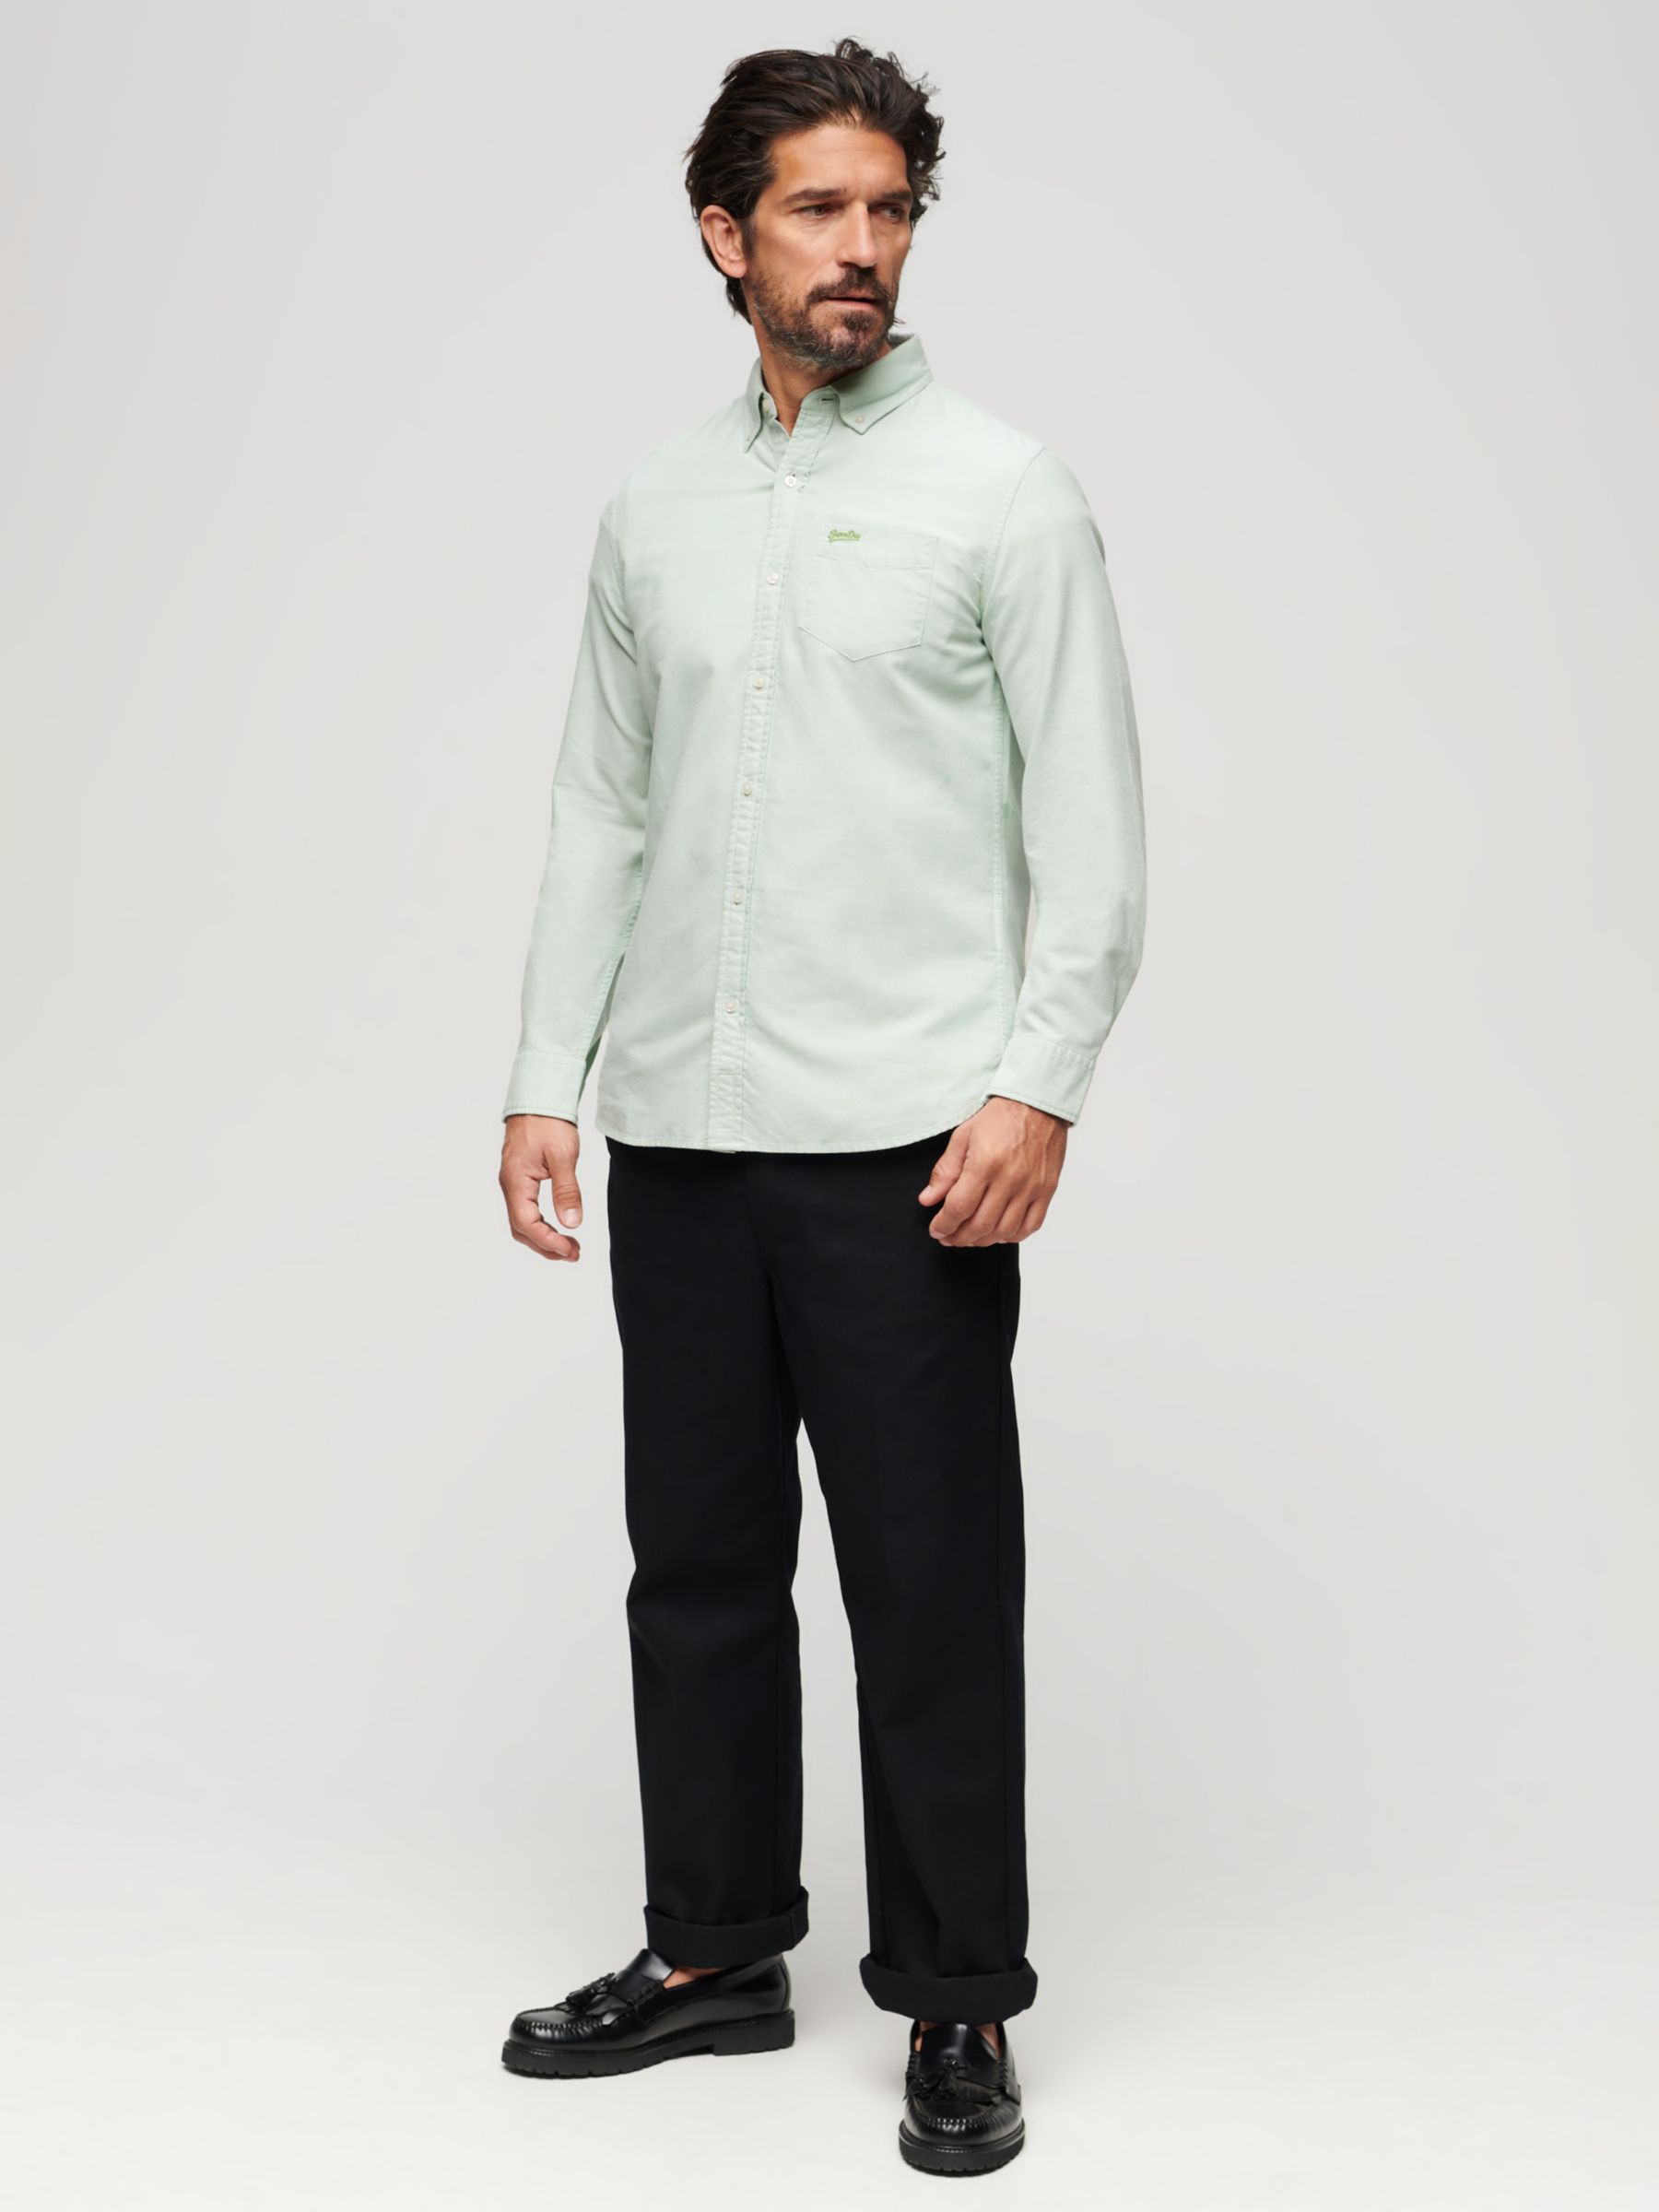 Buy Superdry Organic Cotton Long Sleeve Oxford Shirt Online at johnlewis.com